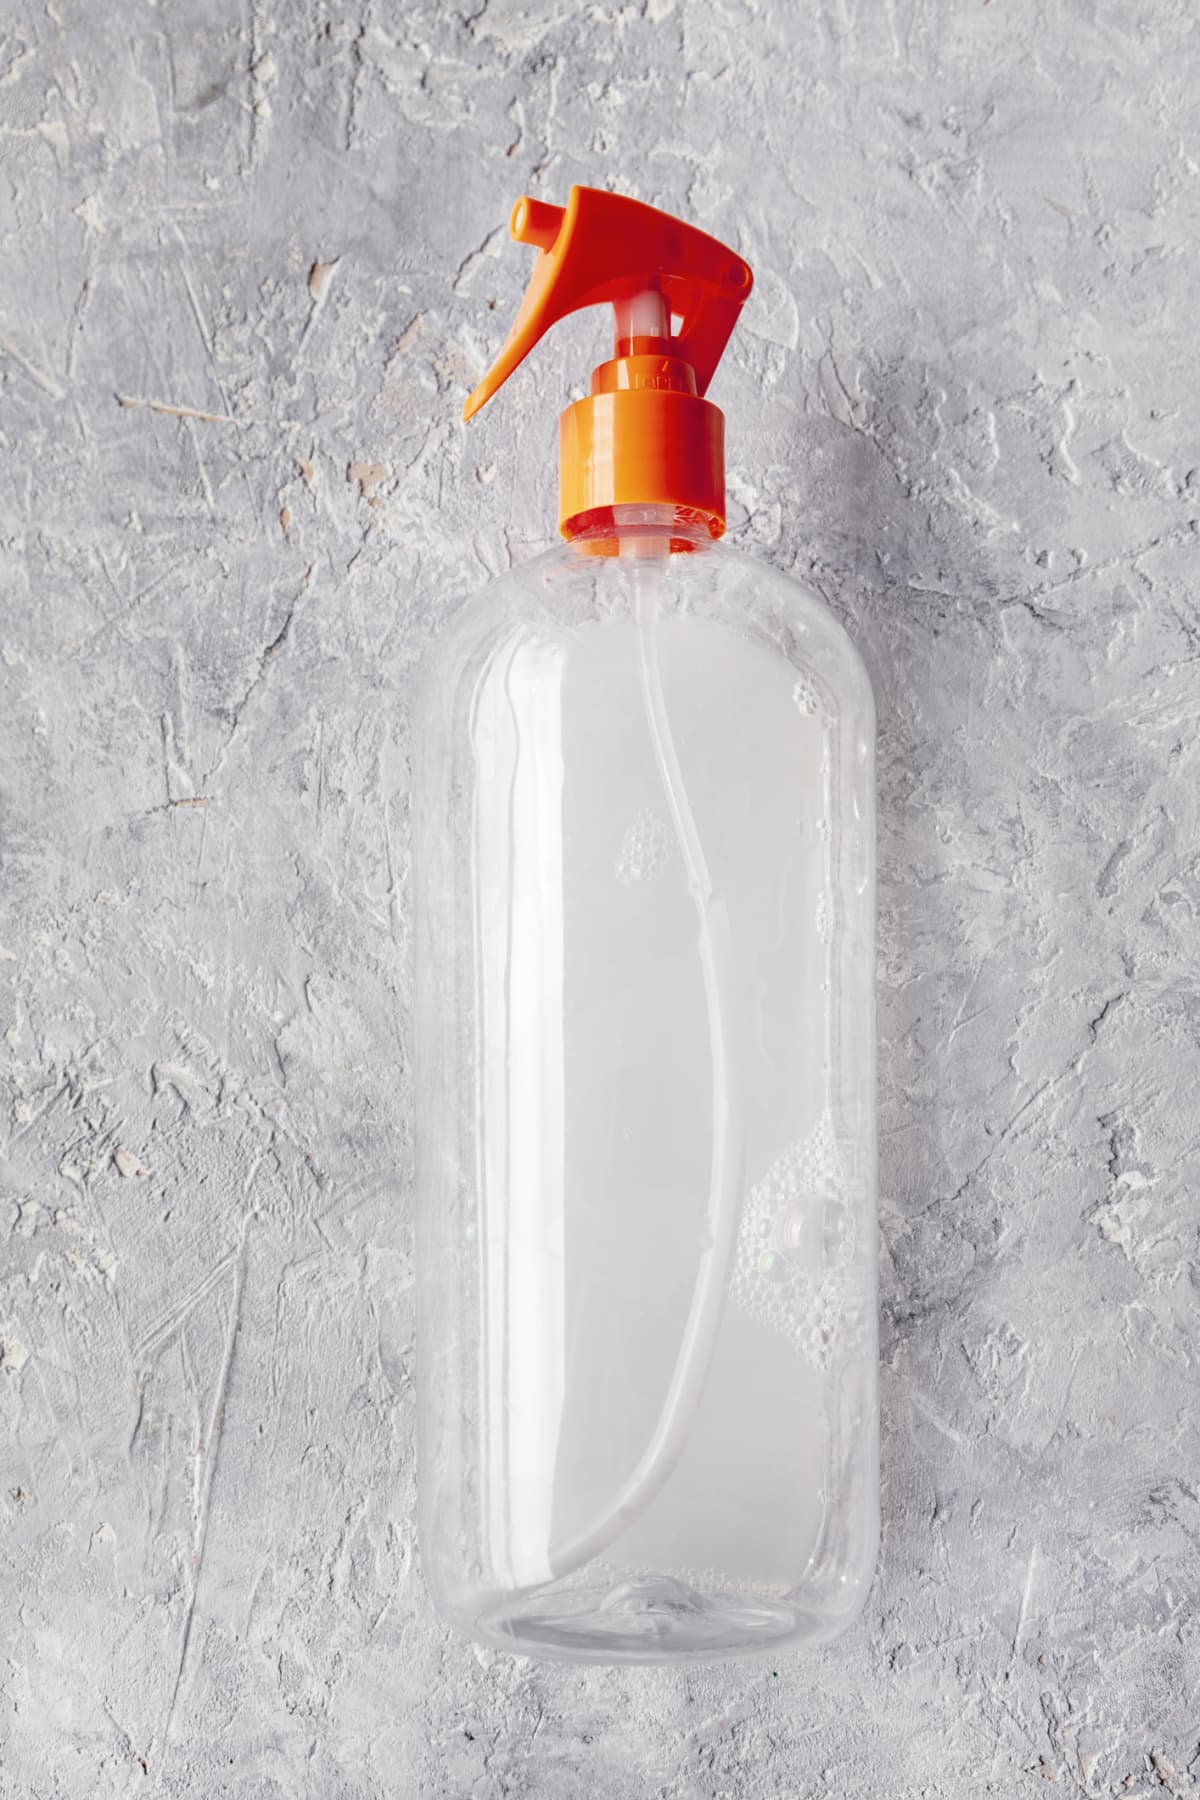 A spray bottle against a gray background